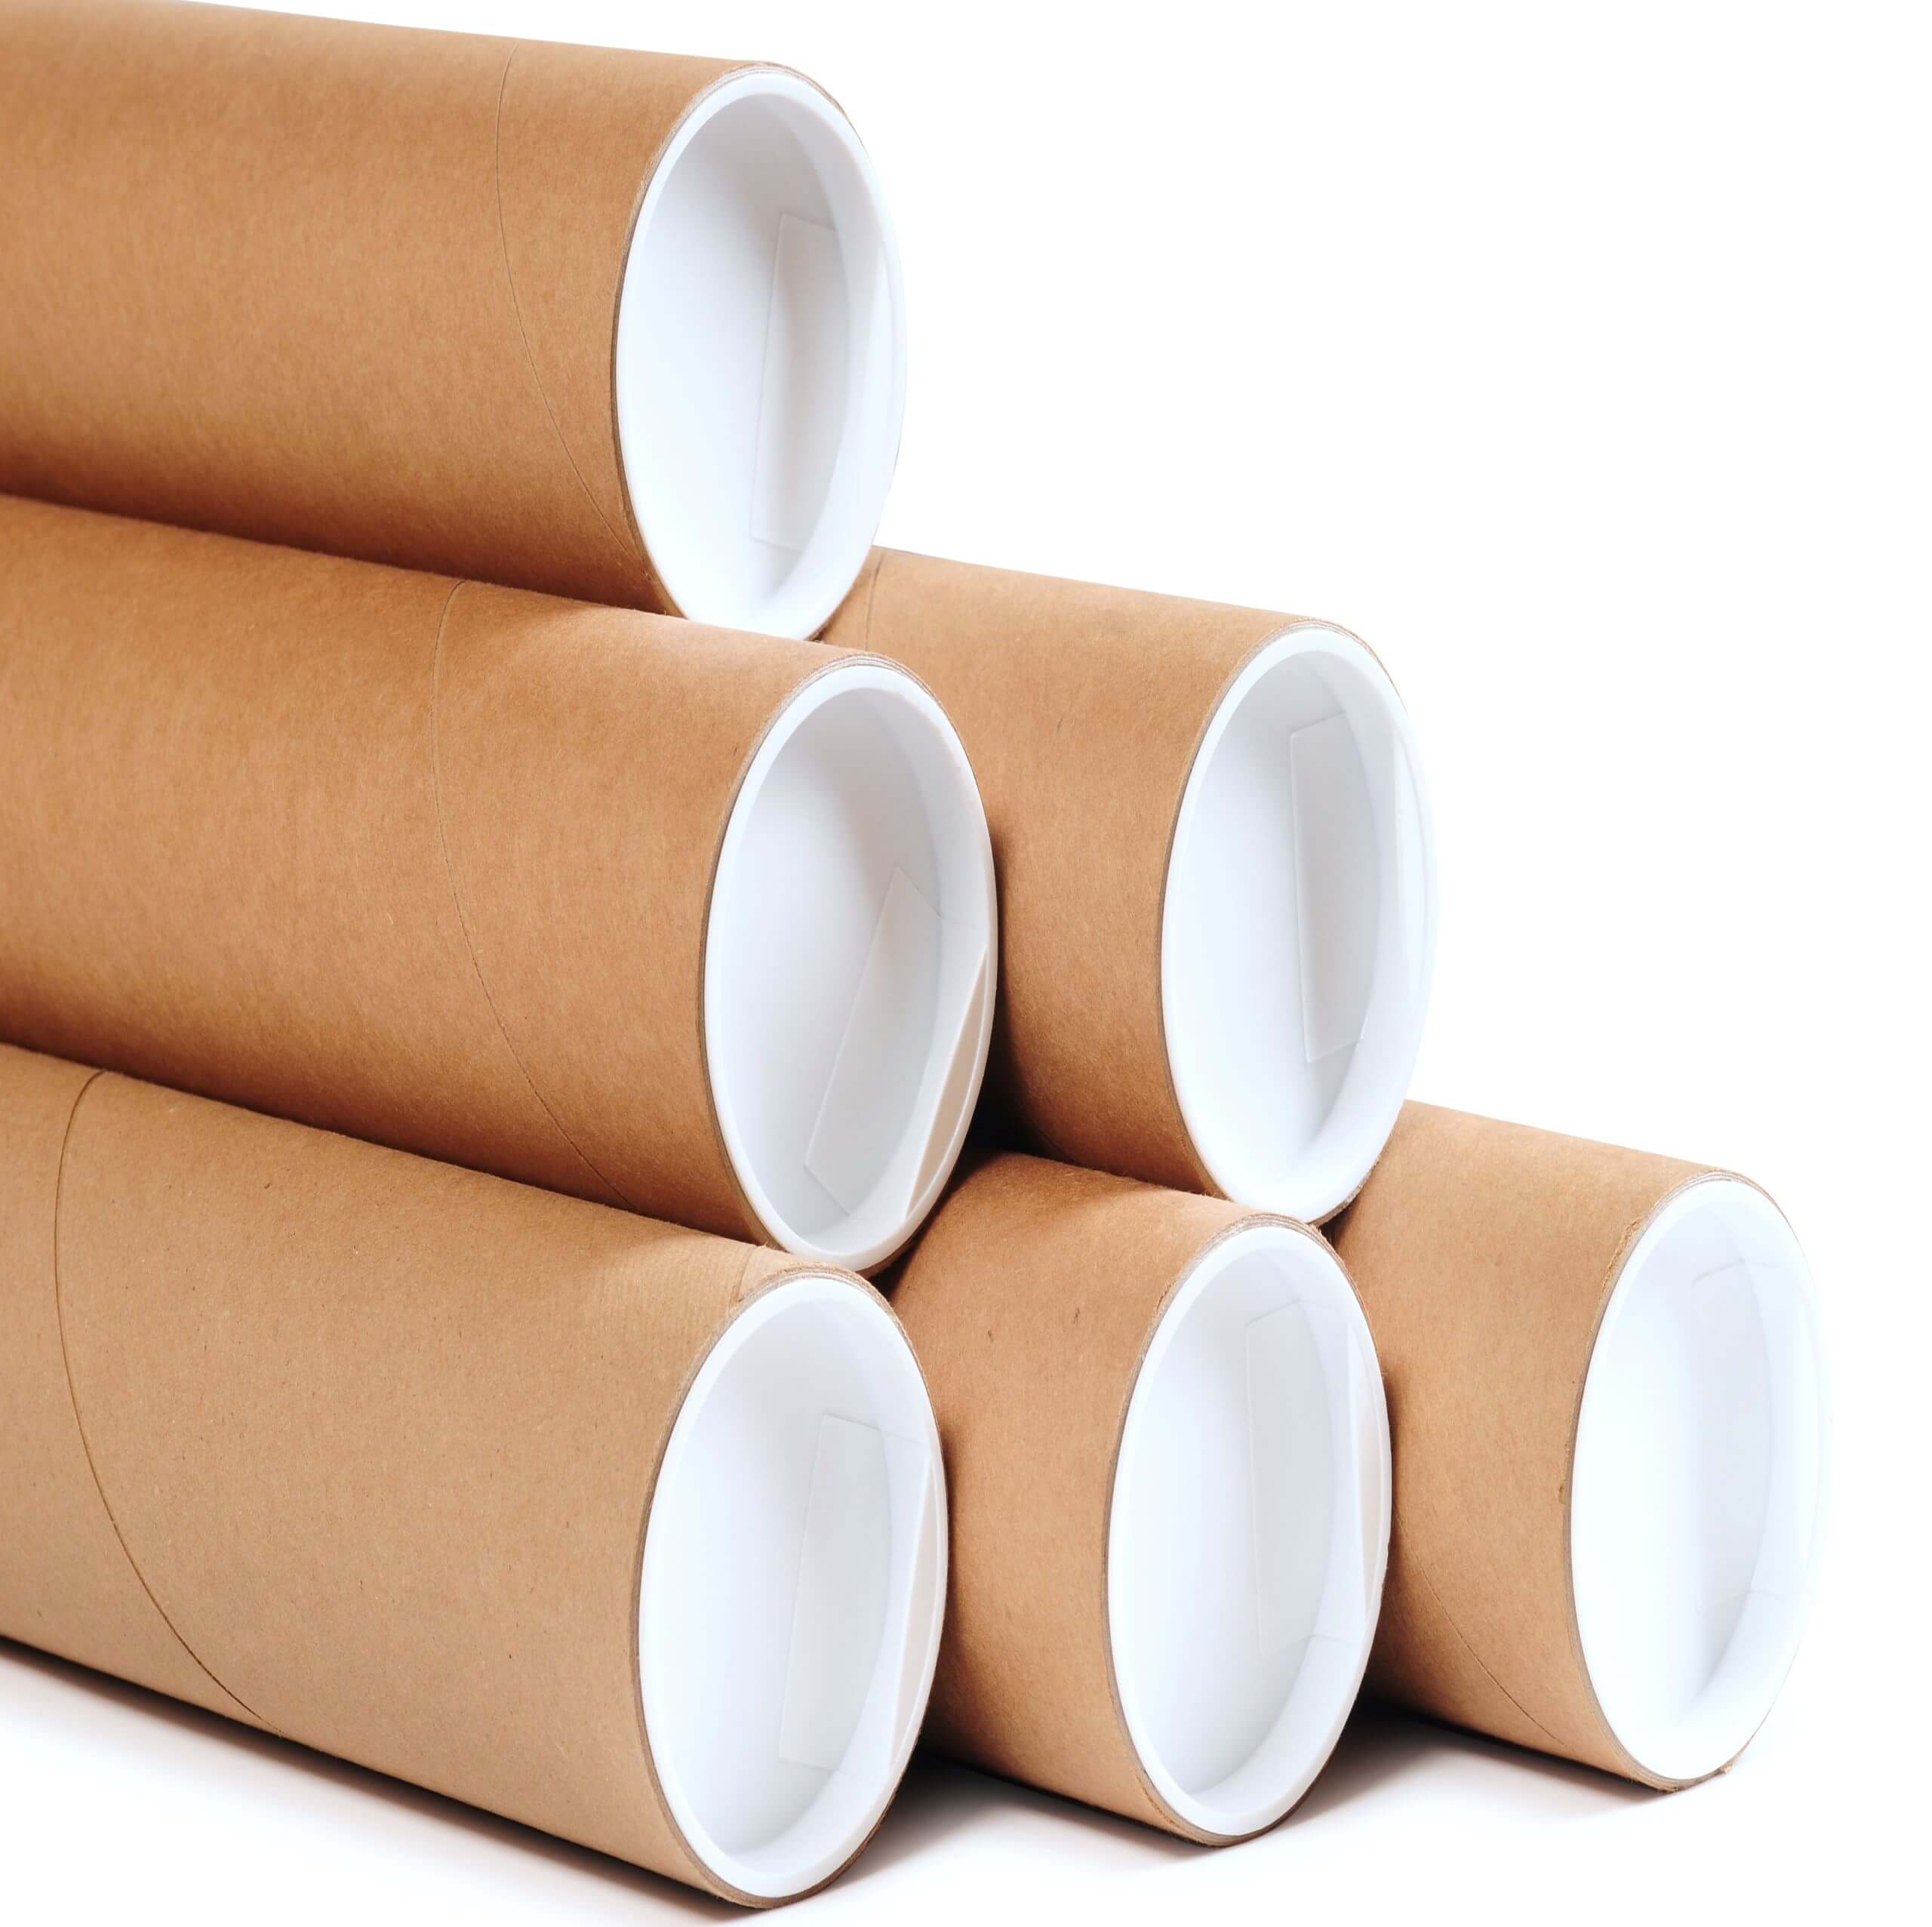 An image of Cardboard Shipping Tubes.